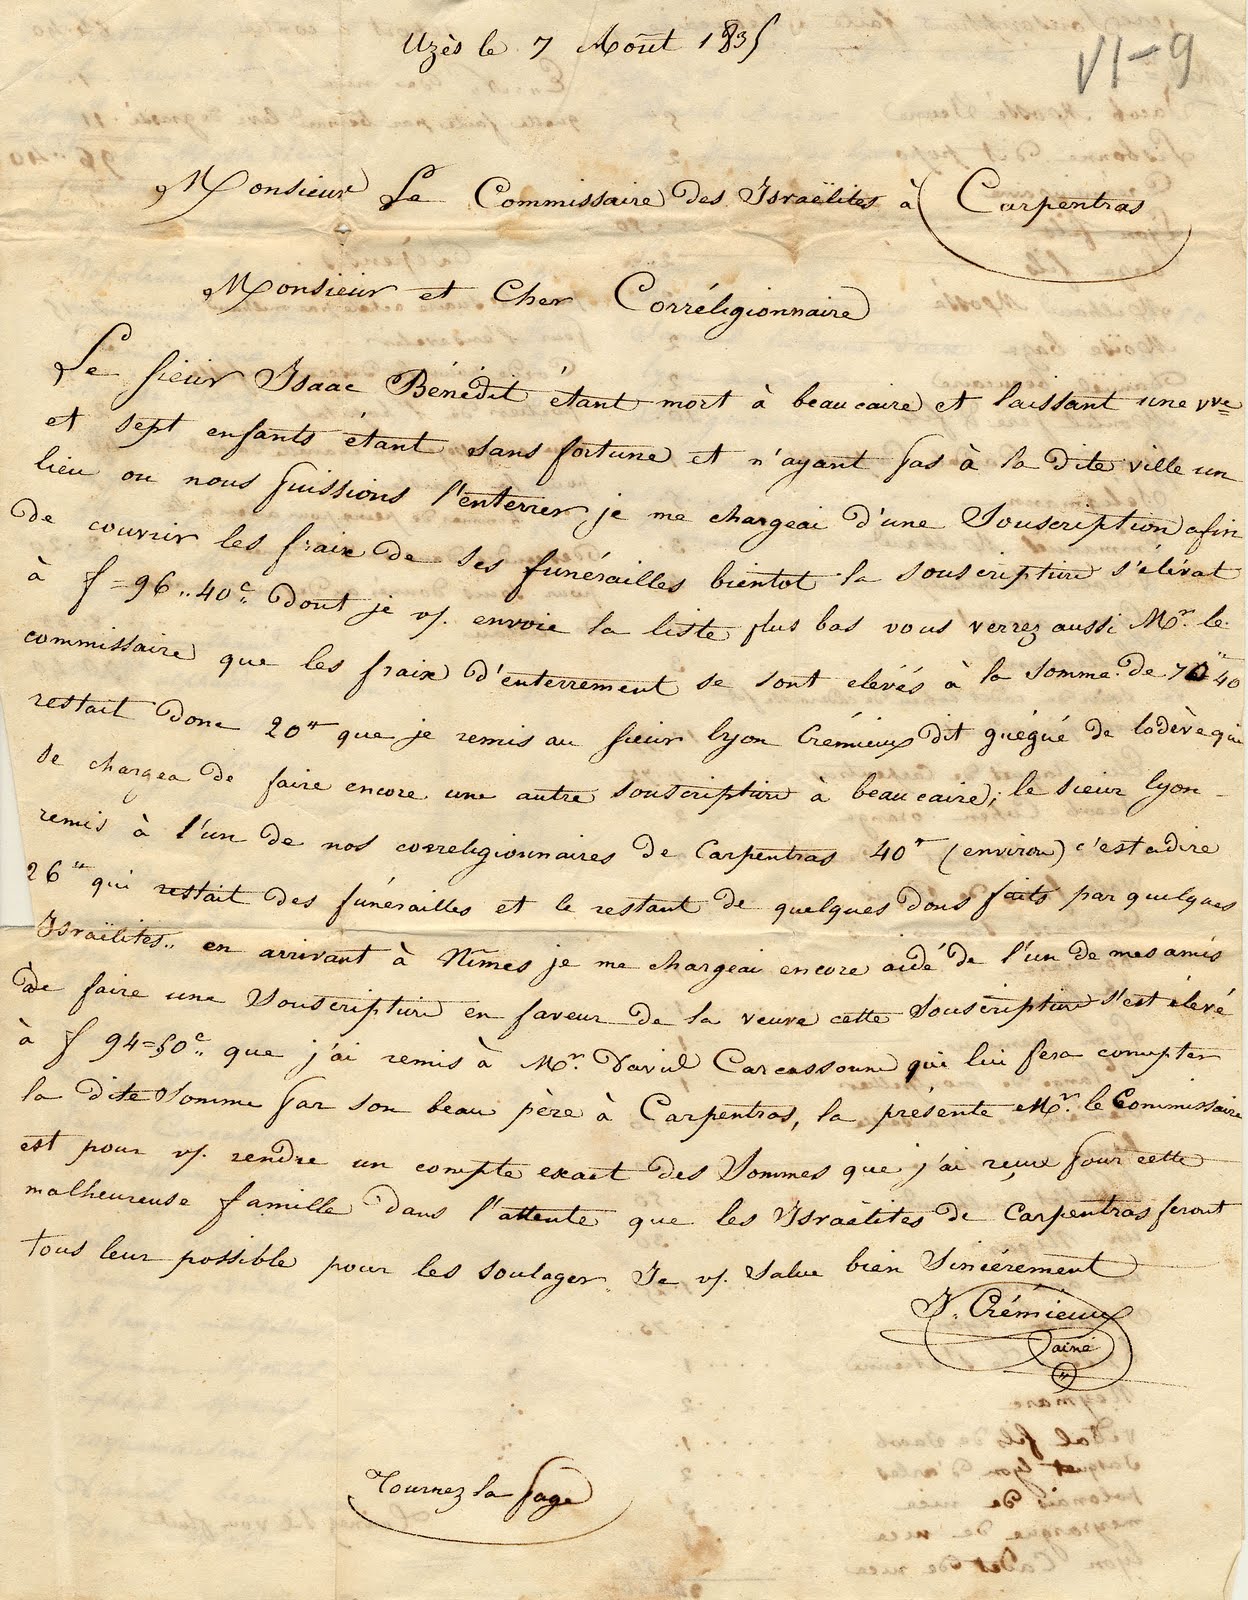 Letter by Adolphe Cremieux